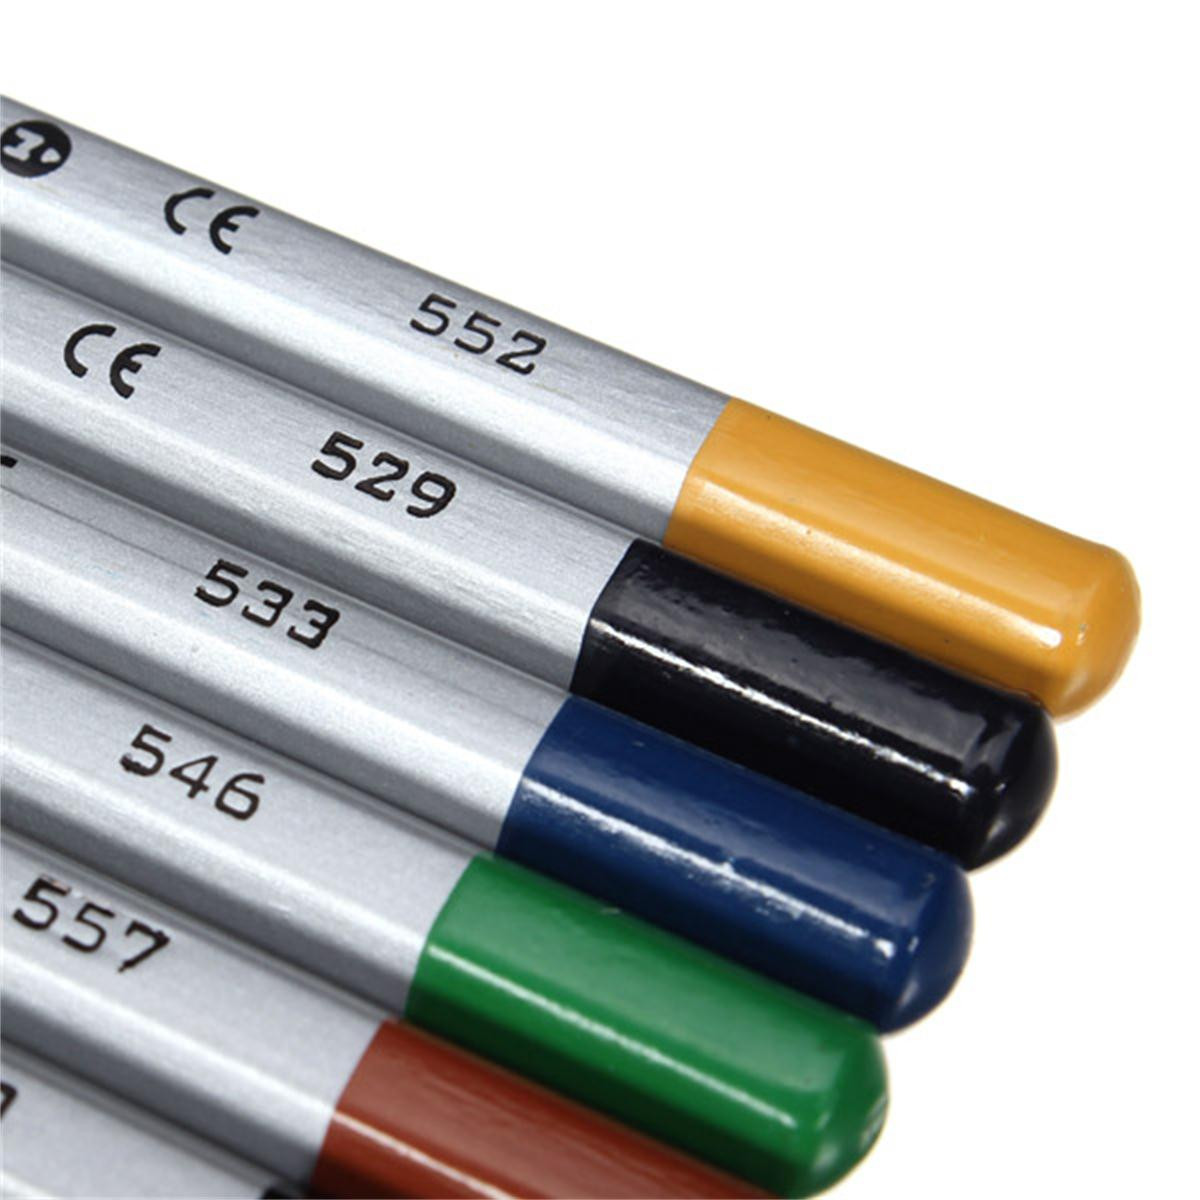 72-Colors-Art-Drawing-Pencil-Set-Oil-Non-toxic-Pencils-Painting-Sketching-Drawing-Stationery-School--973251-13